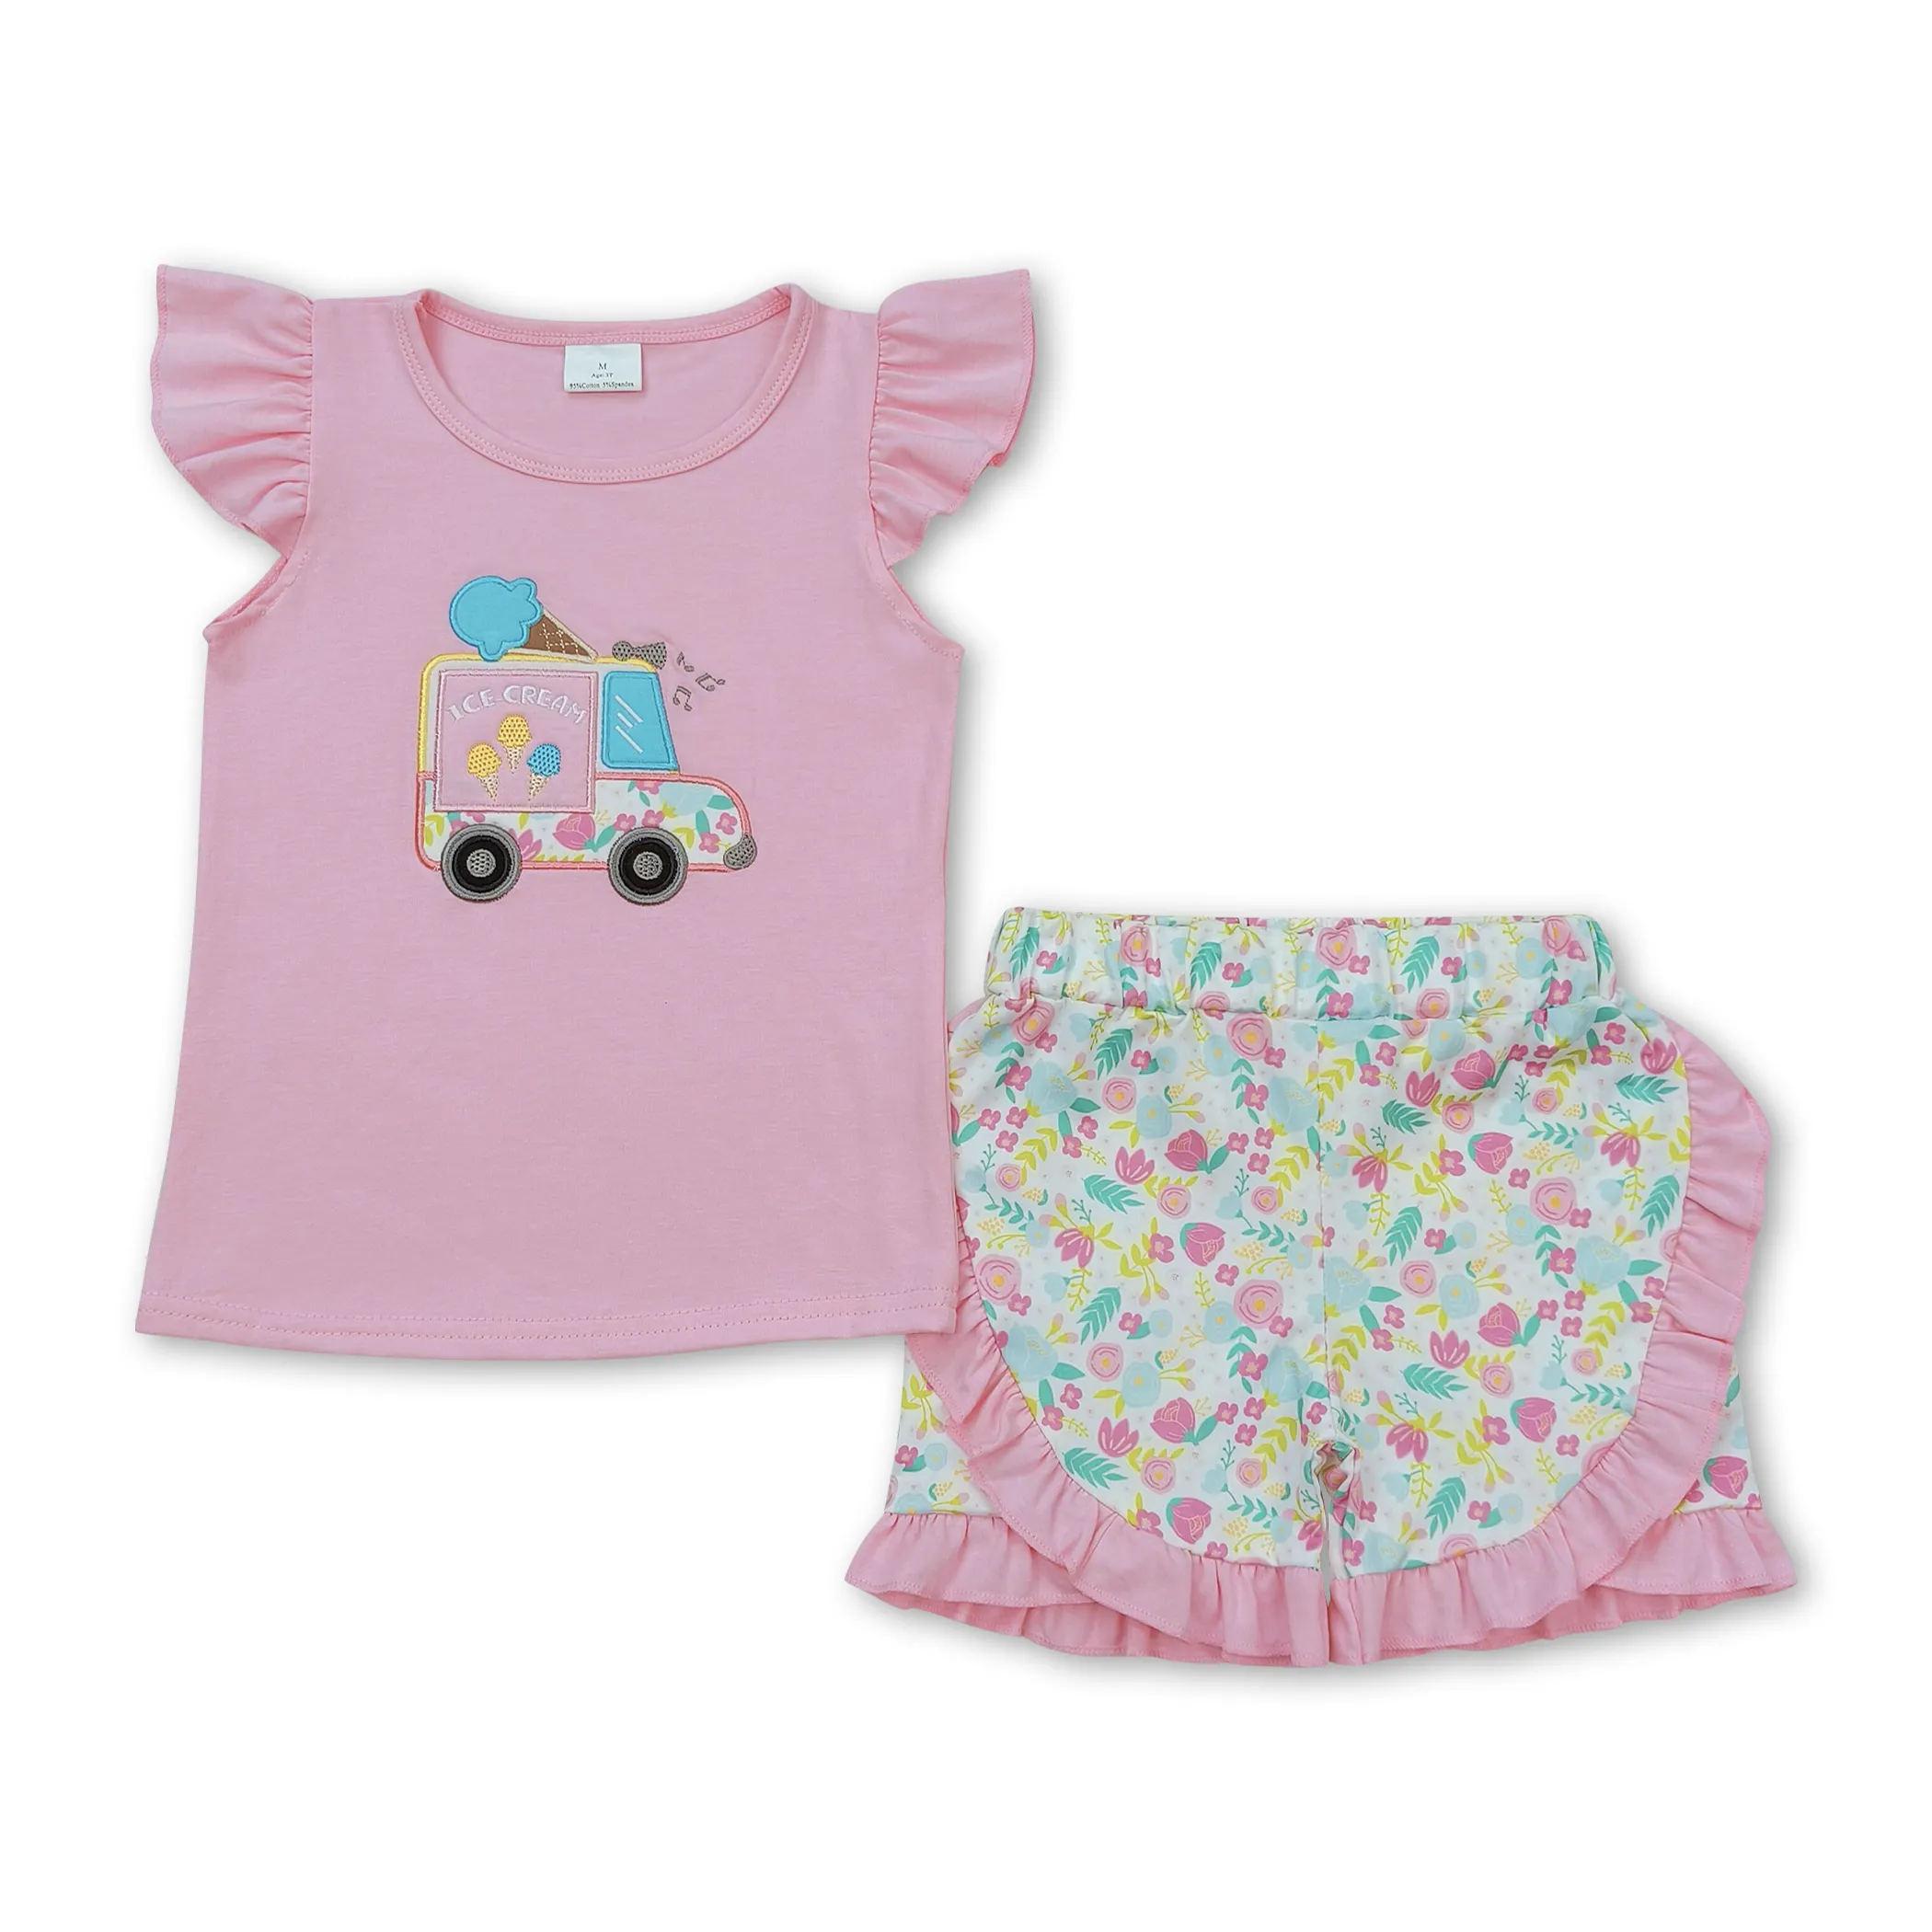 GSSO0644 Ice cream car embroidery floral shorts summer set kids clothing girls